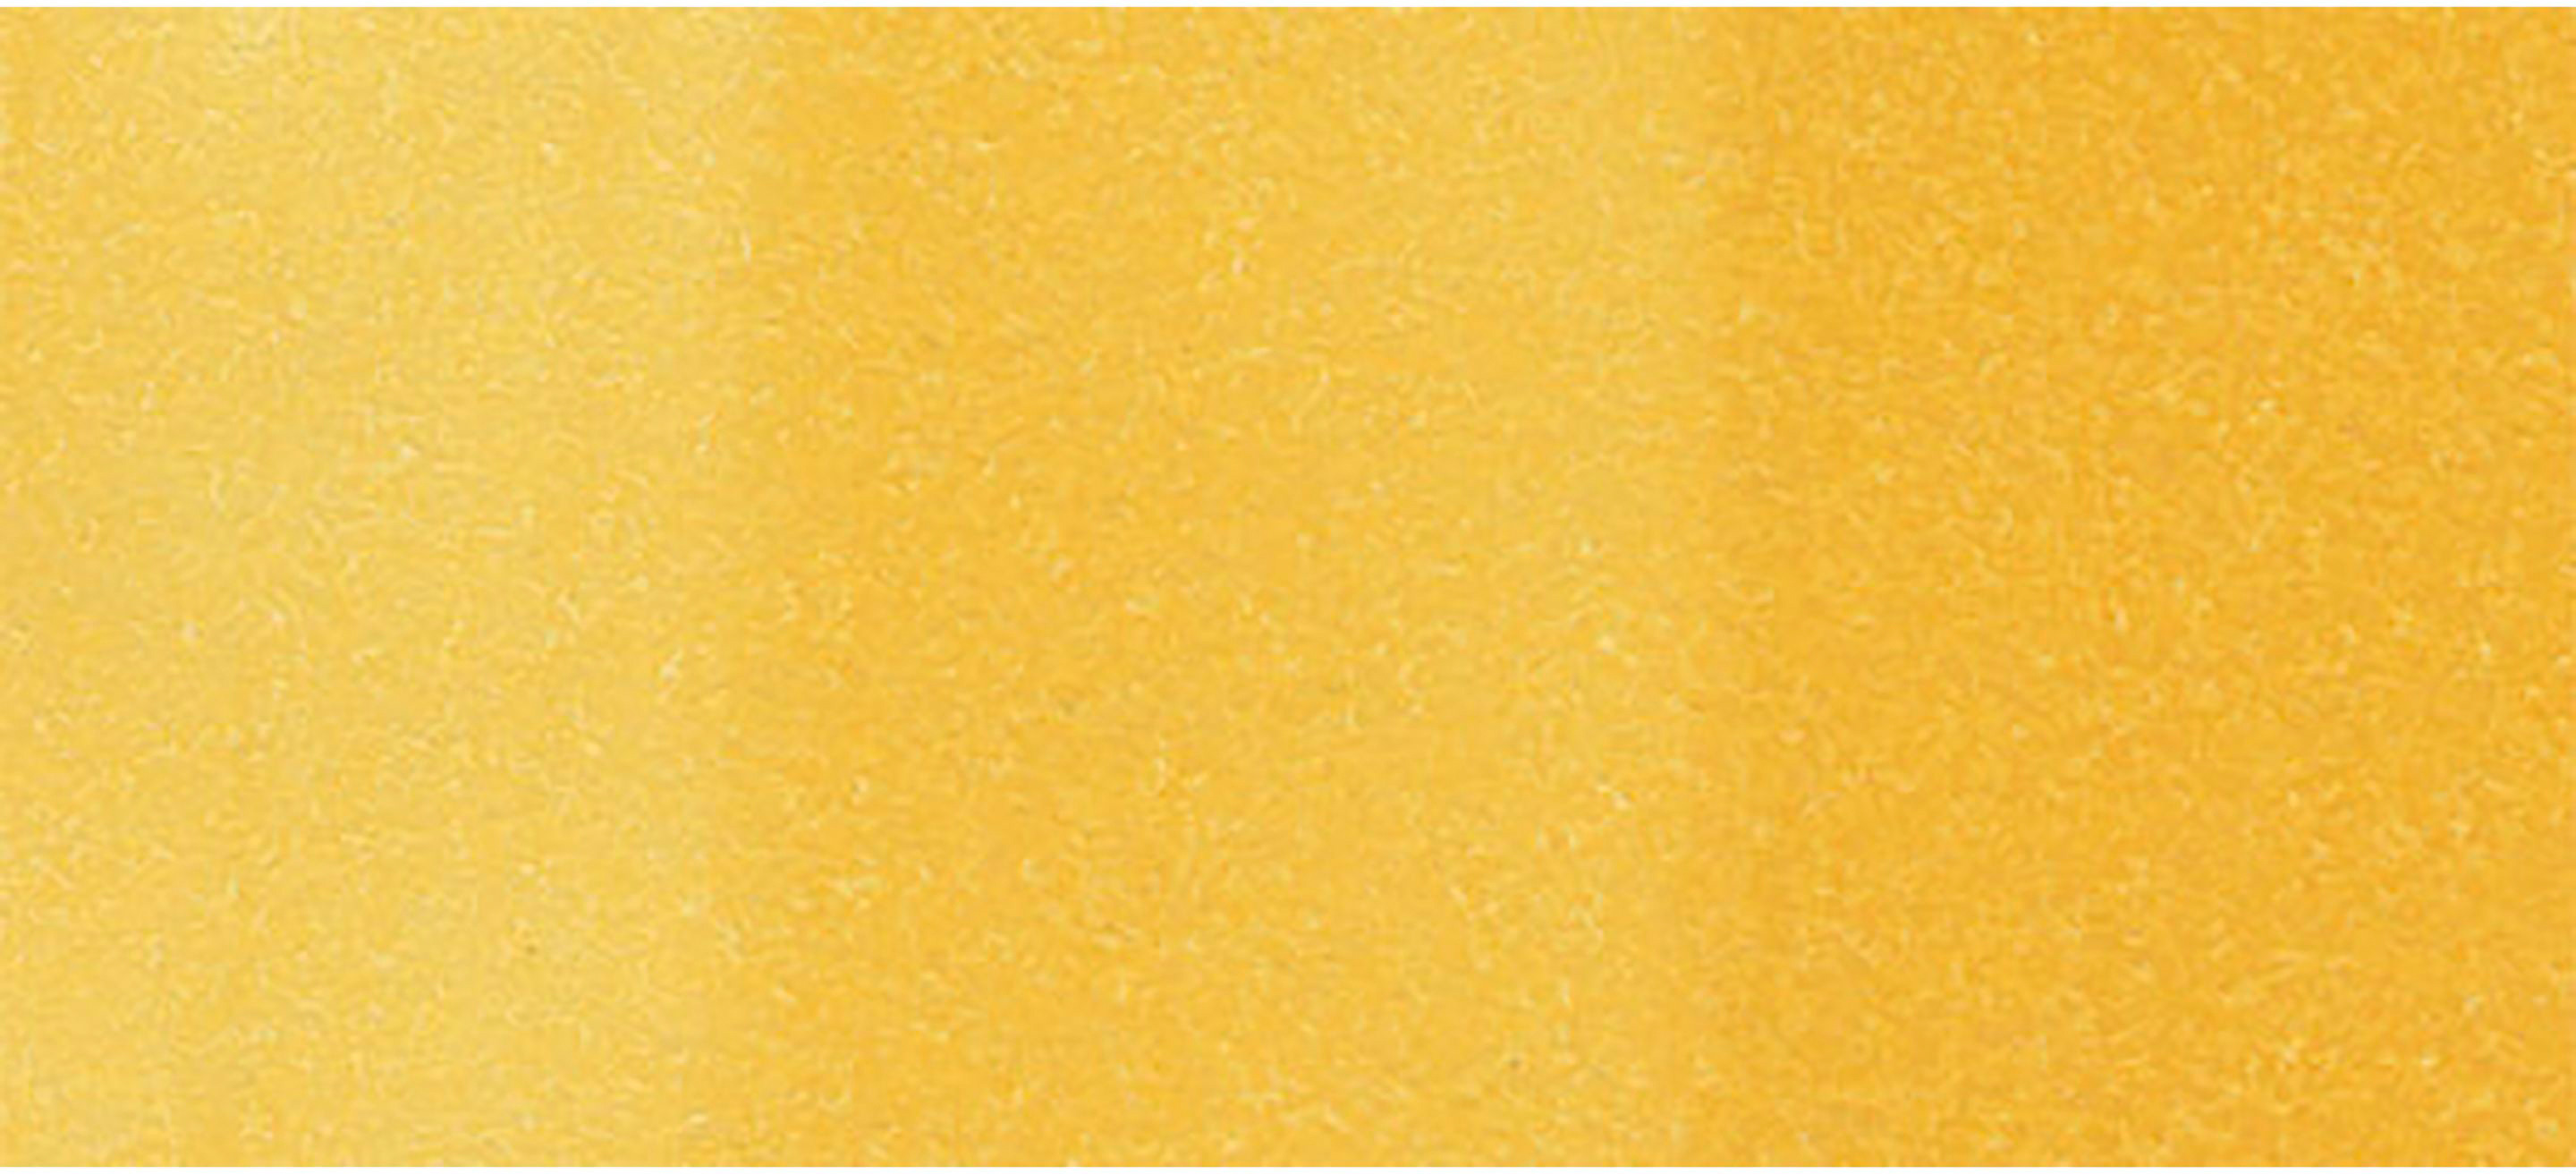 COPIC Marker Ciao 2207557 Y21 - Buttercup Yellow